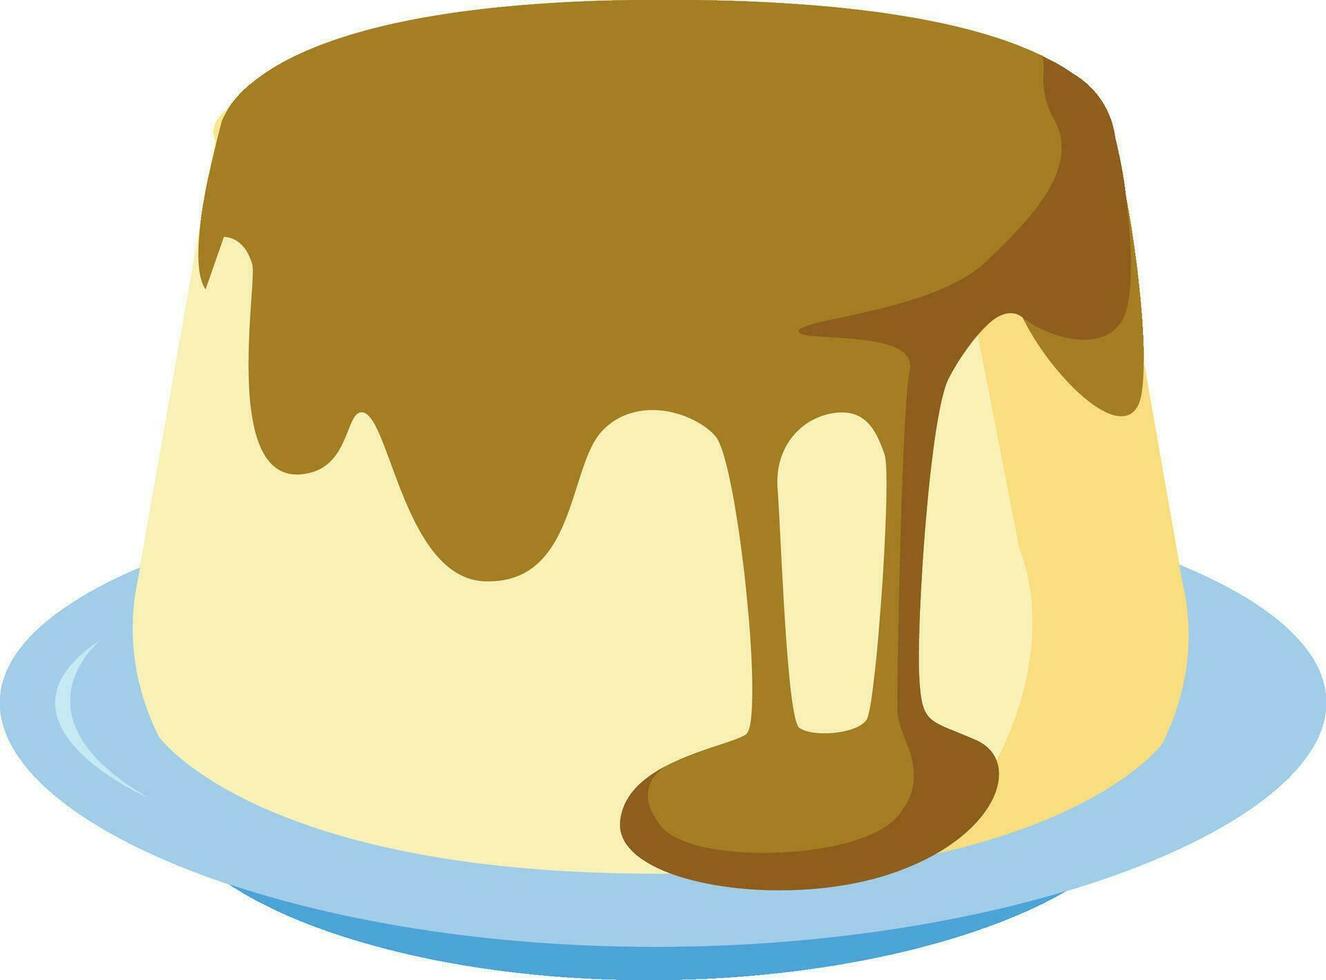 Pudding vector. symbol. pudding logo design. Pudding on plate. vector